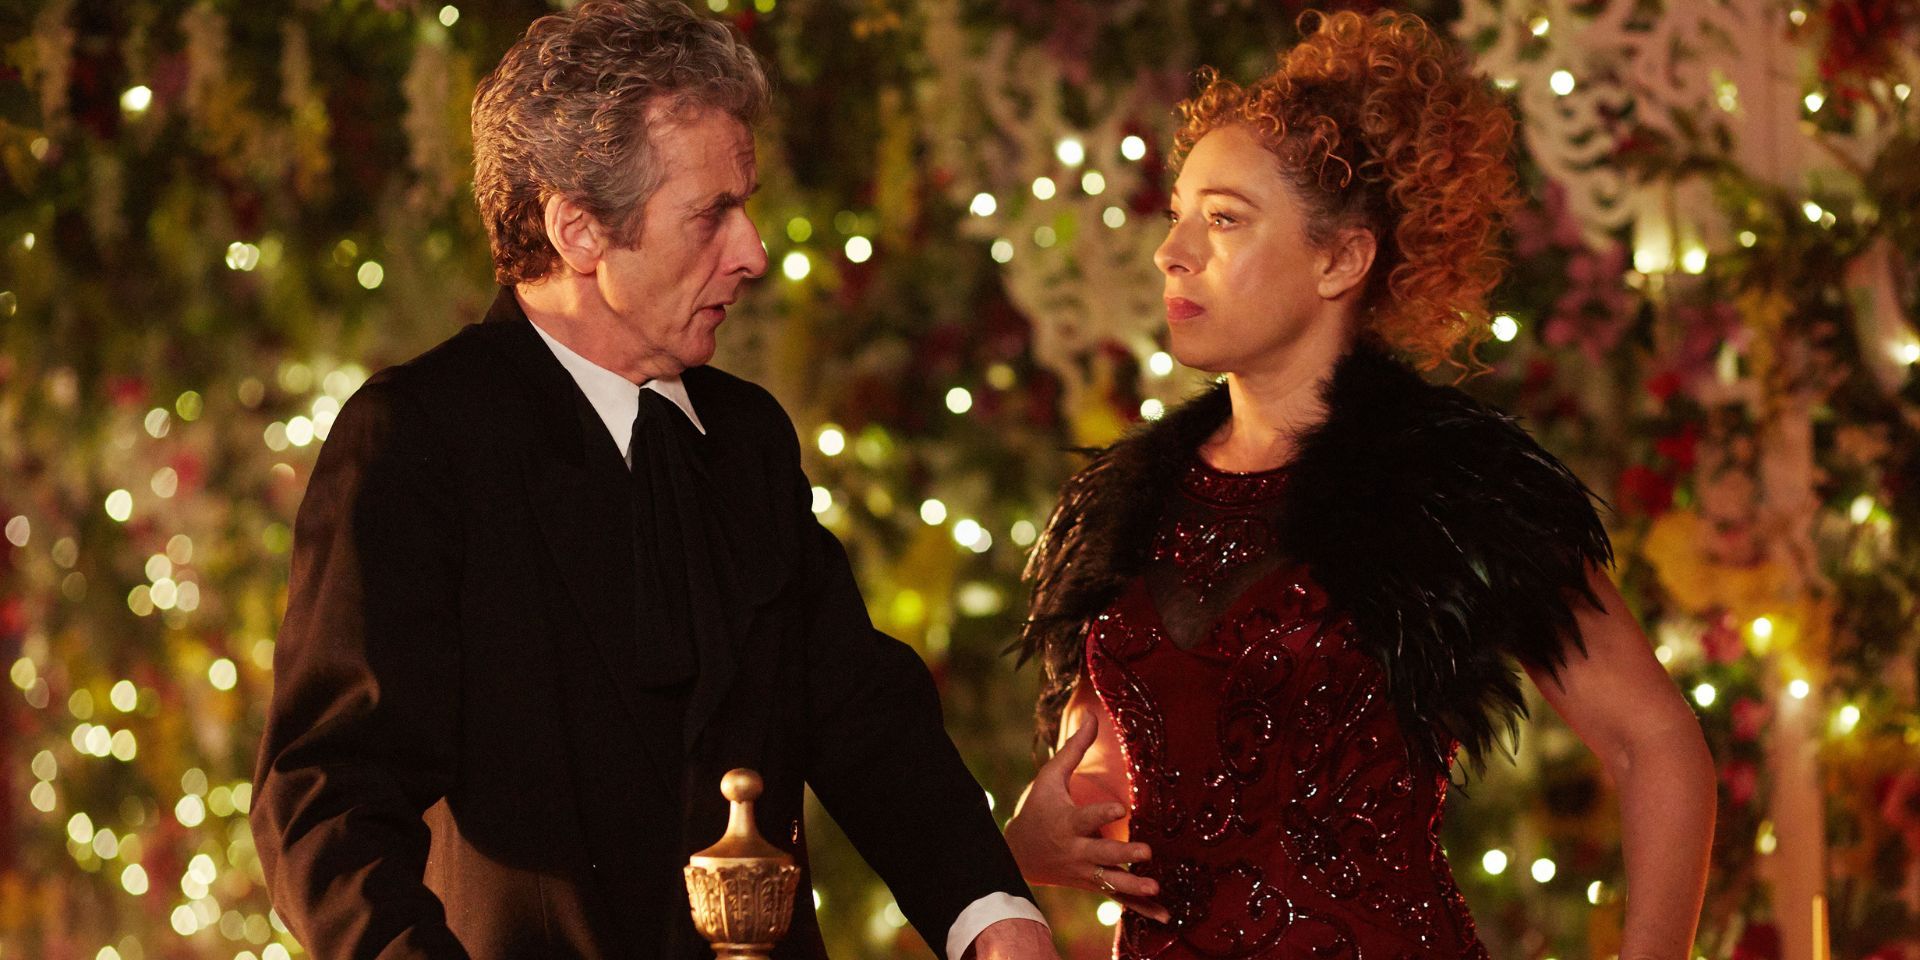 "The Husbands of River Song" Doctor Who episode with Peter Capaldi and Alex Kingston